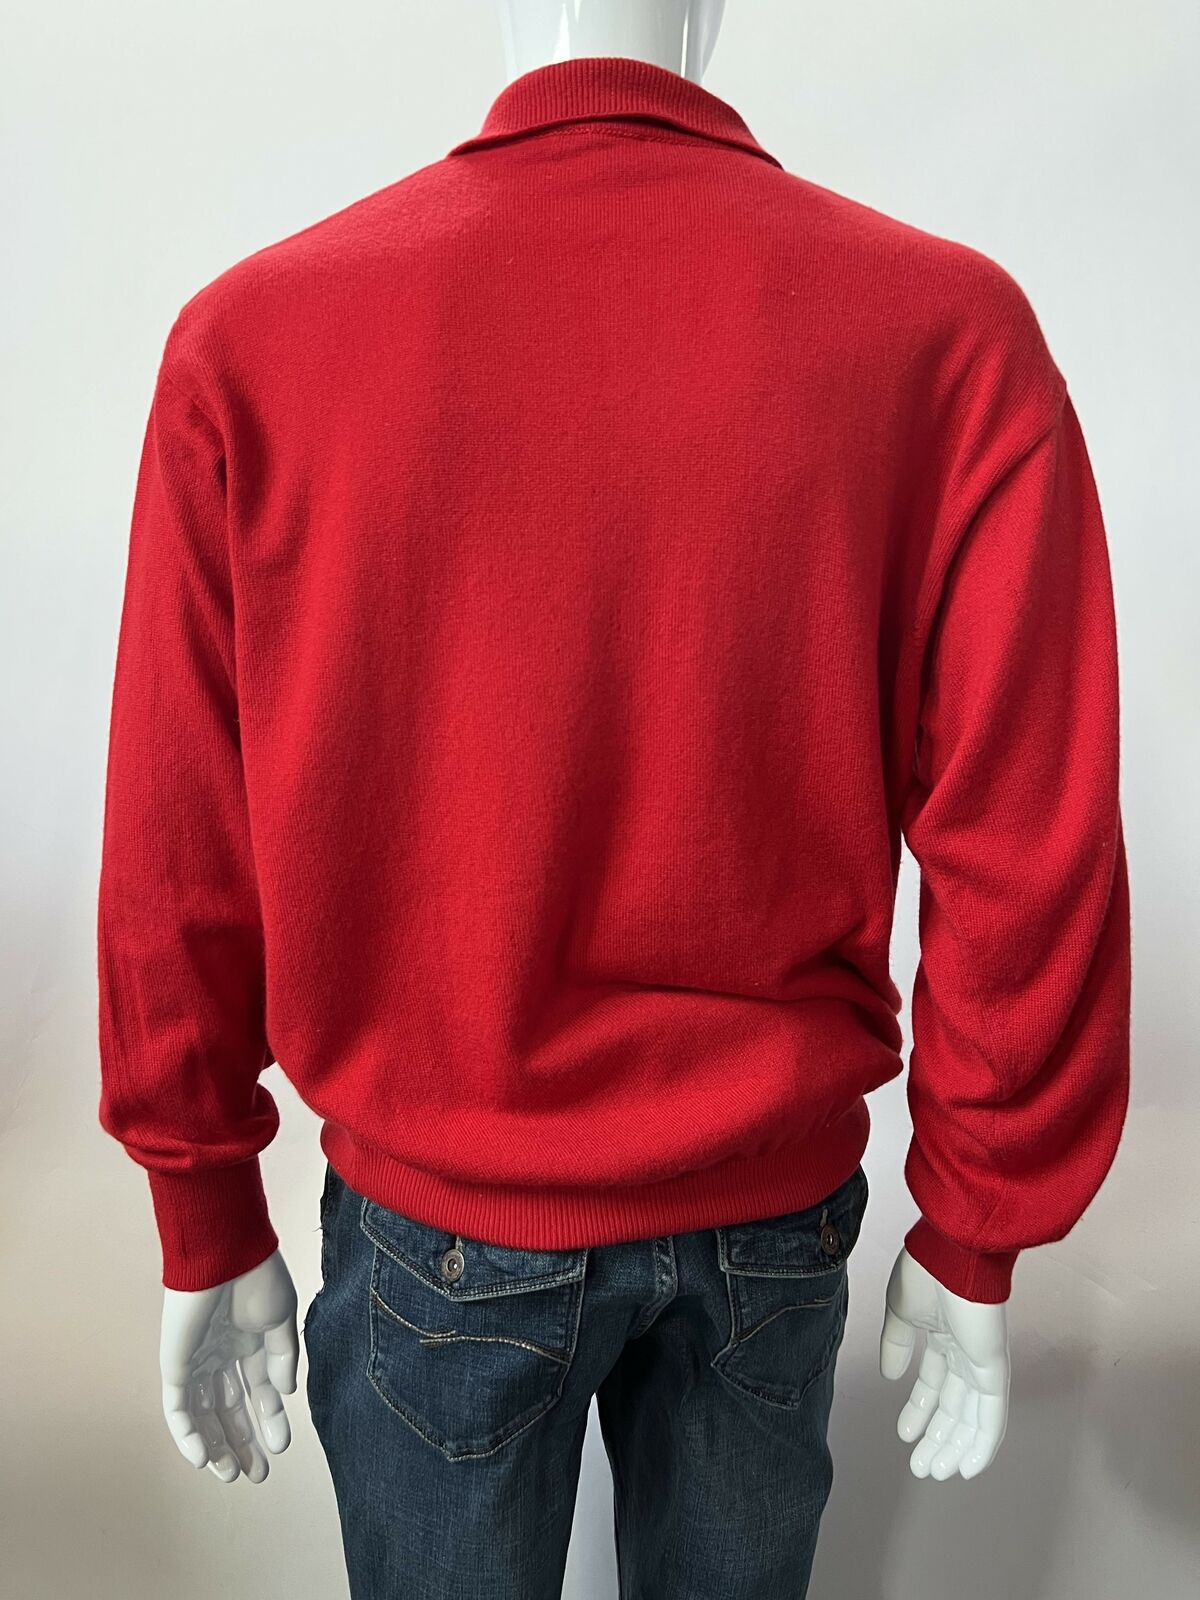 Hermes Paris Mens Polo Sweater Red Cashmere Blend… - image 6